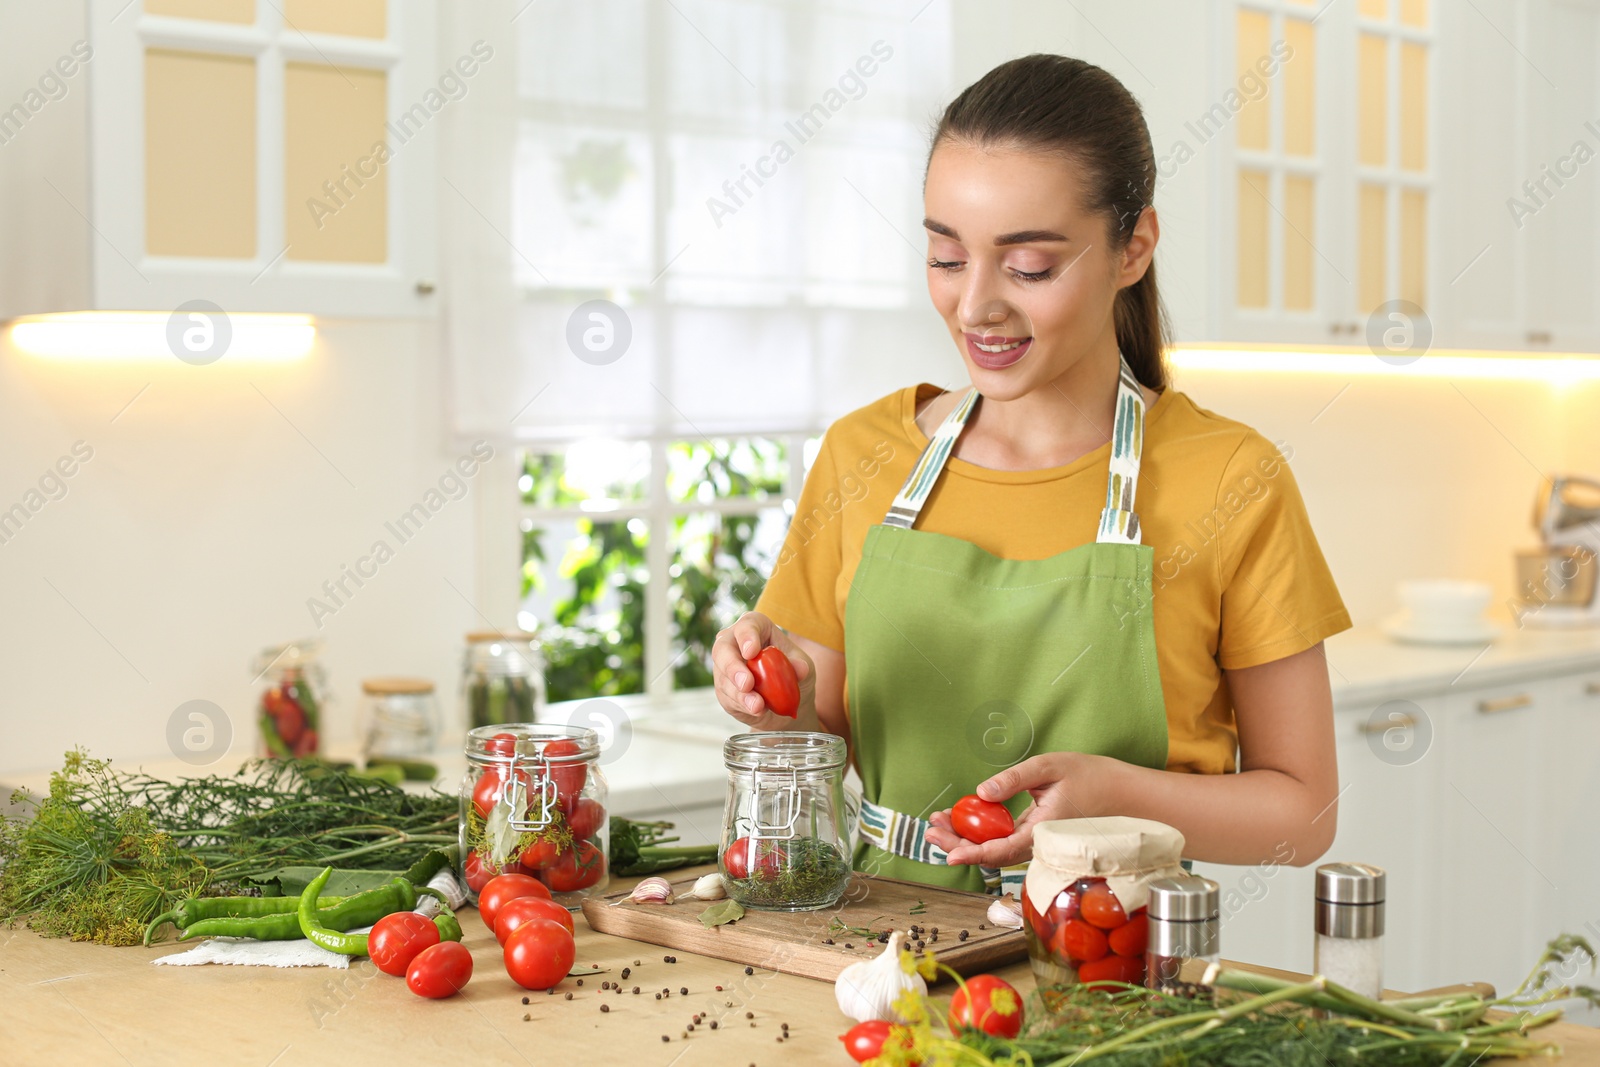 Photo of Woman putting tomatoes into pickling jar at table in kitchen